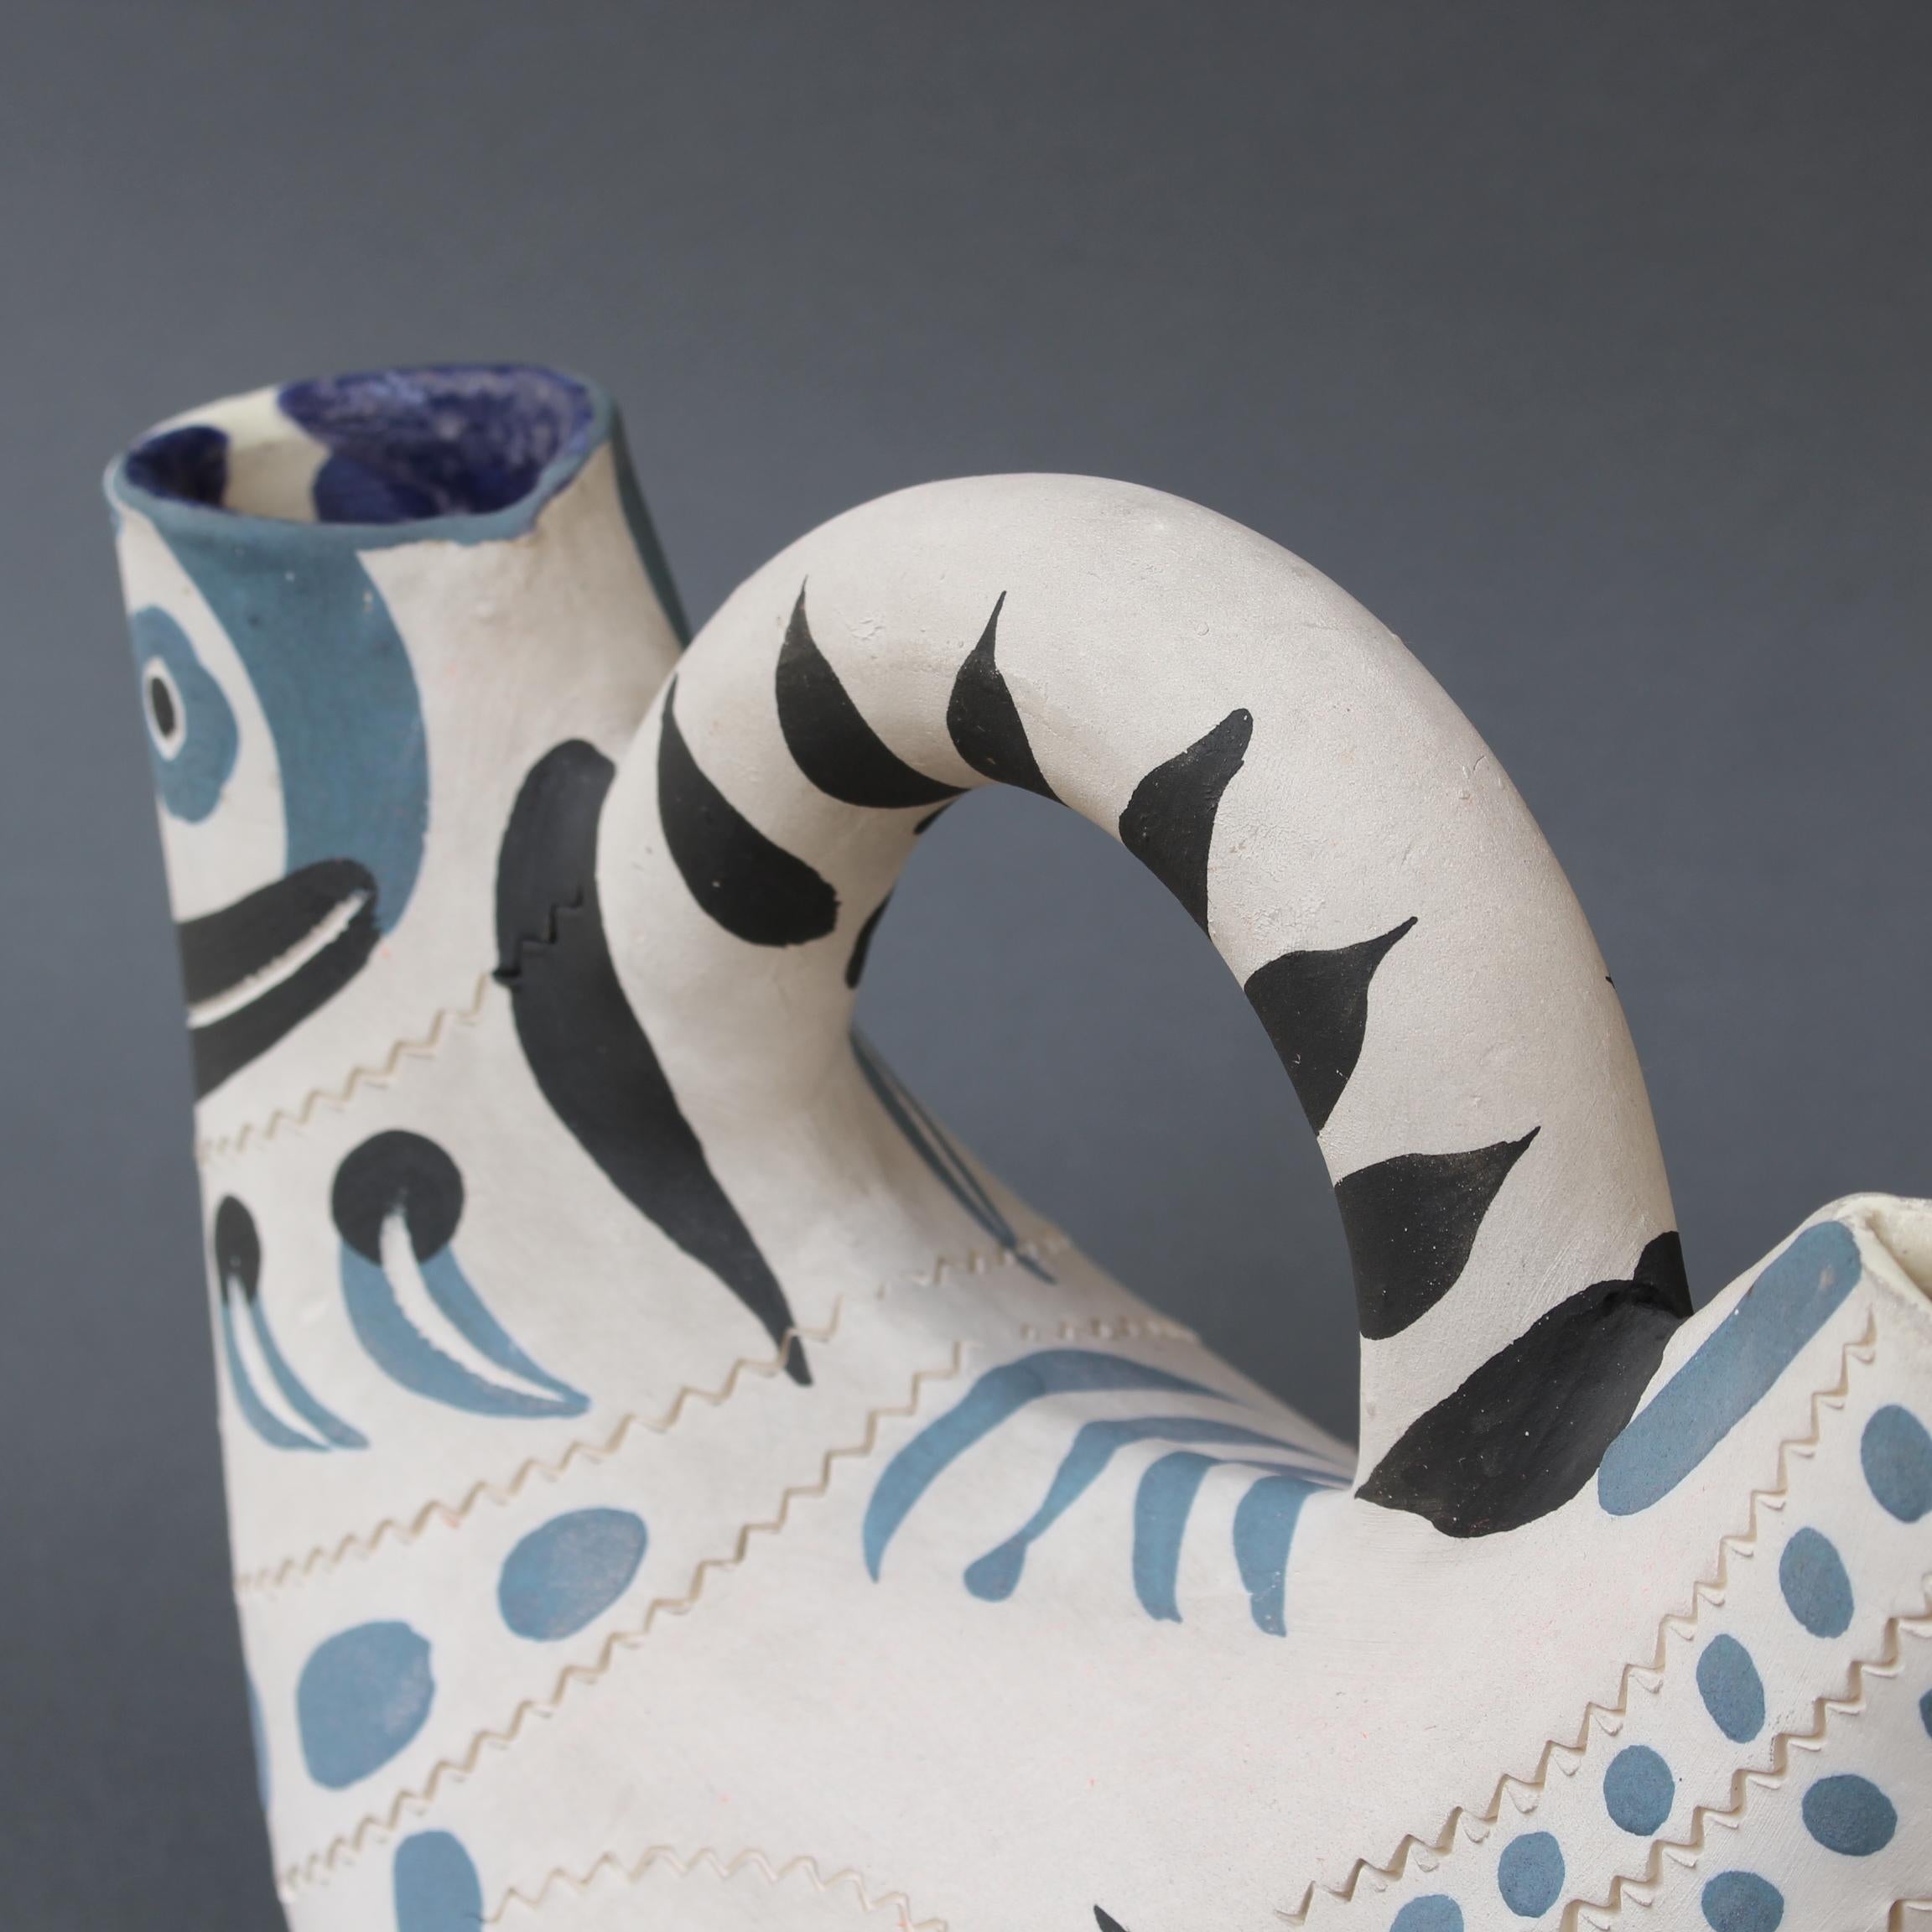 Ceramic 'Pichet Espagnol' from the Madoura Pottery 'AR 245' by Pablo Picasso '1954' For Sale